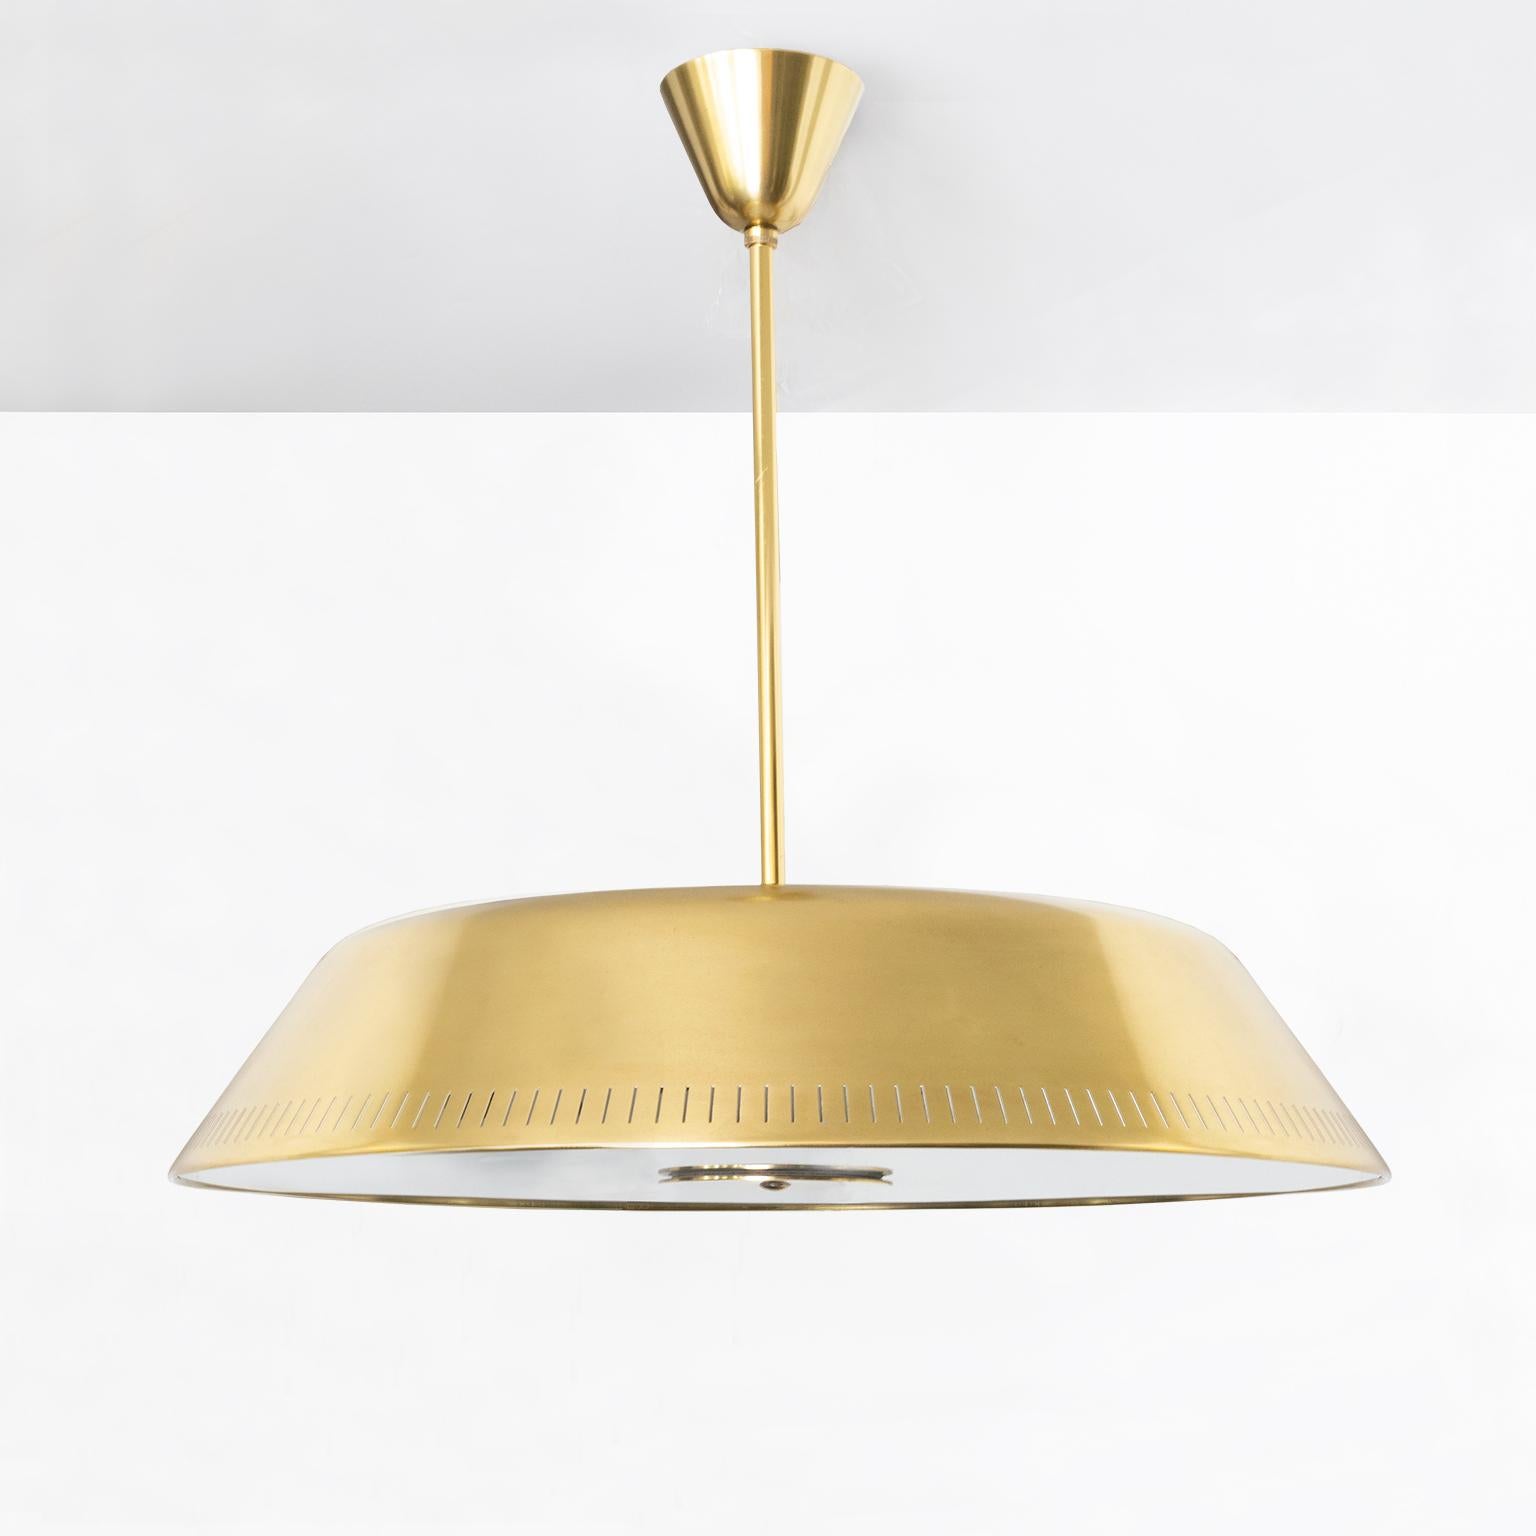 Frosted Scandinavian Brass Pendant by Harald Notini for Böhlmarks, Sweden with 9 sockets